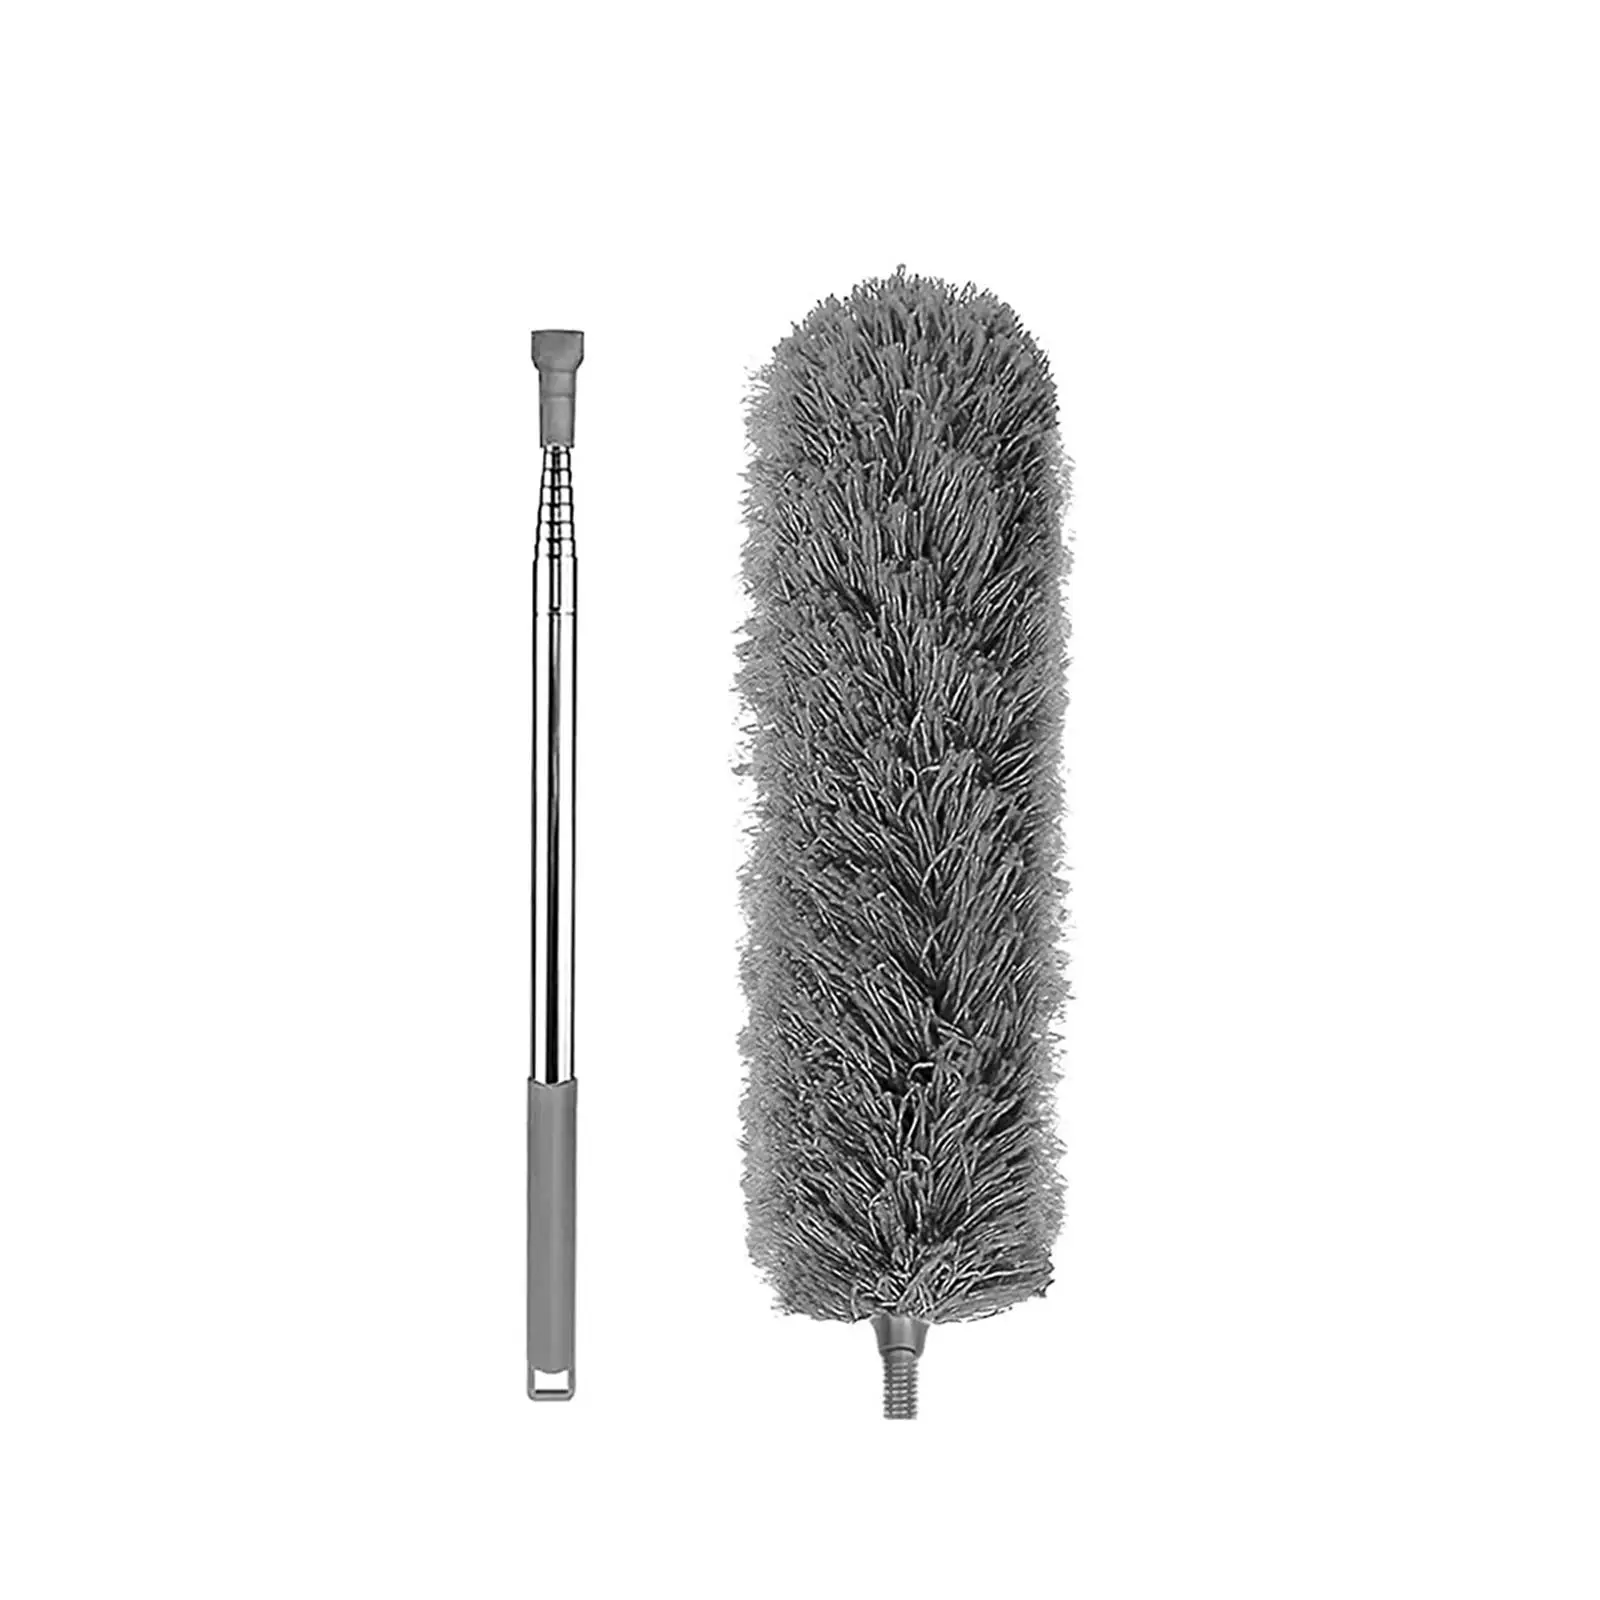 Gutter Cleaning Brush Telescopic Pole 45cm to 220cm Sturdy Durable Strong Cleaning The Leaves, Debris and Twigs of Gutters